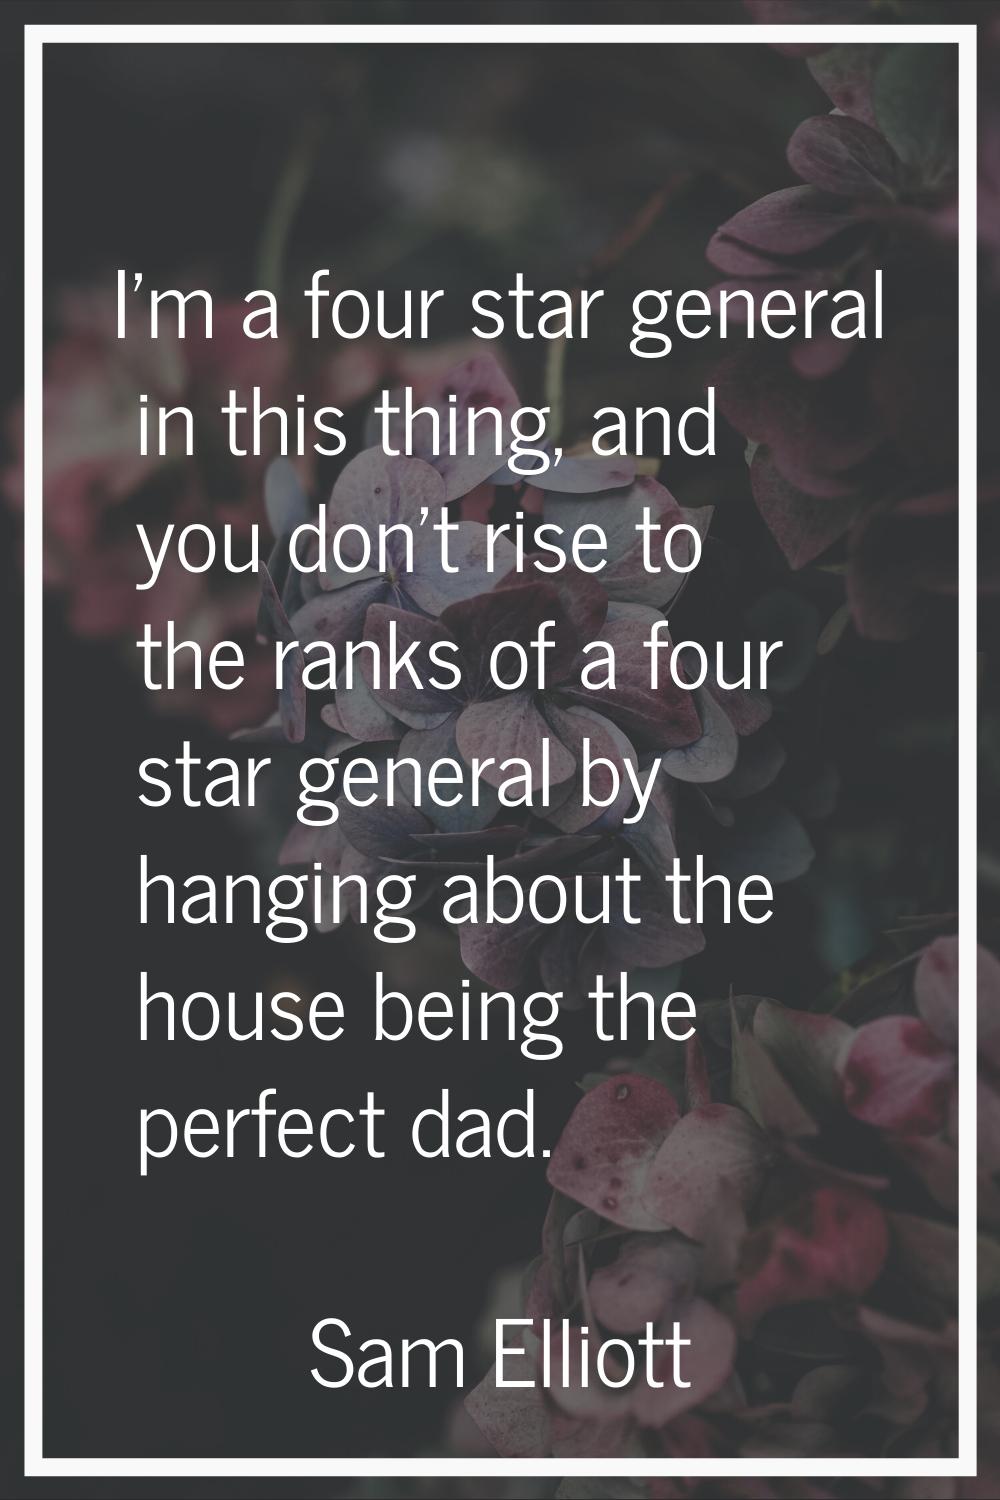 I'm a four star general in this thing, and you don't rise to the ranks of a four star general by ha